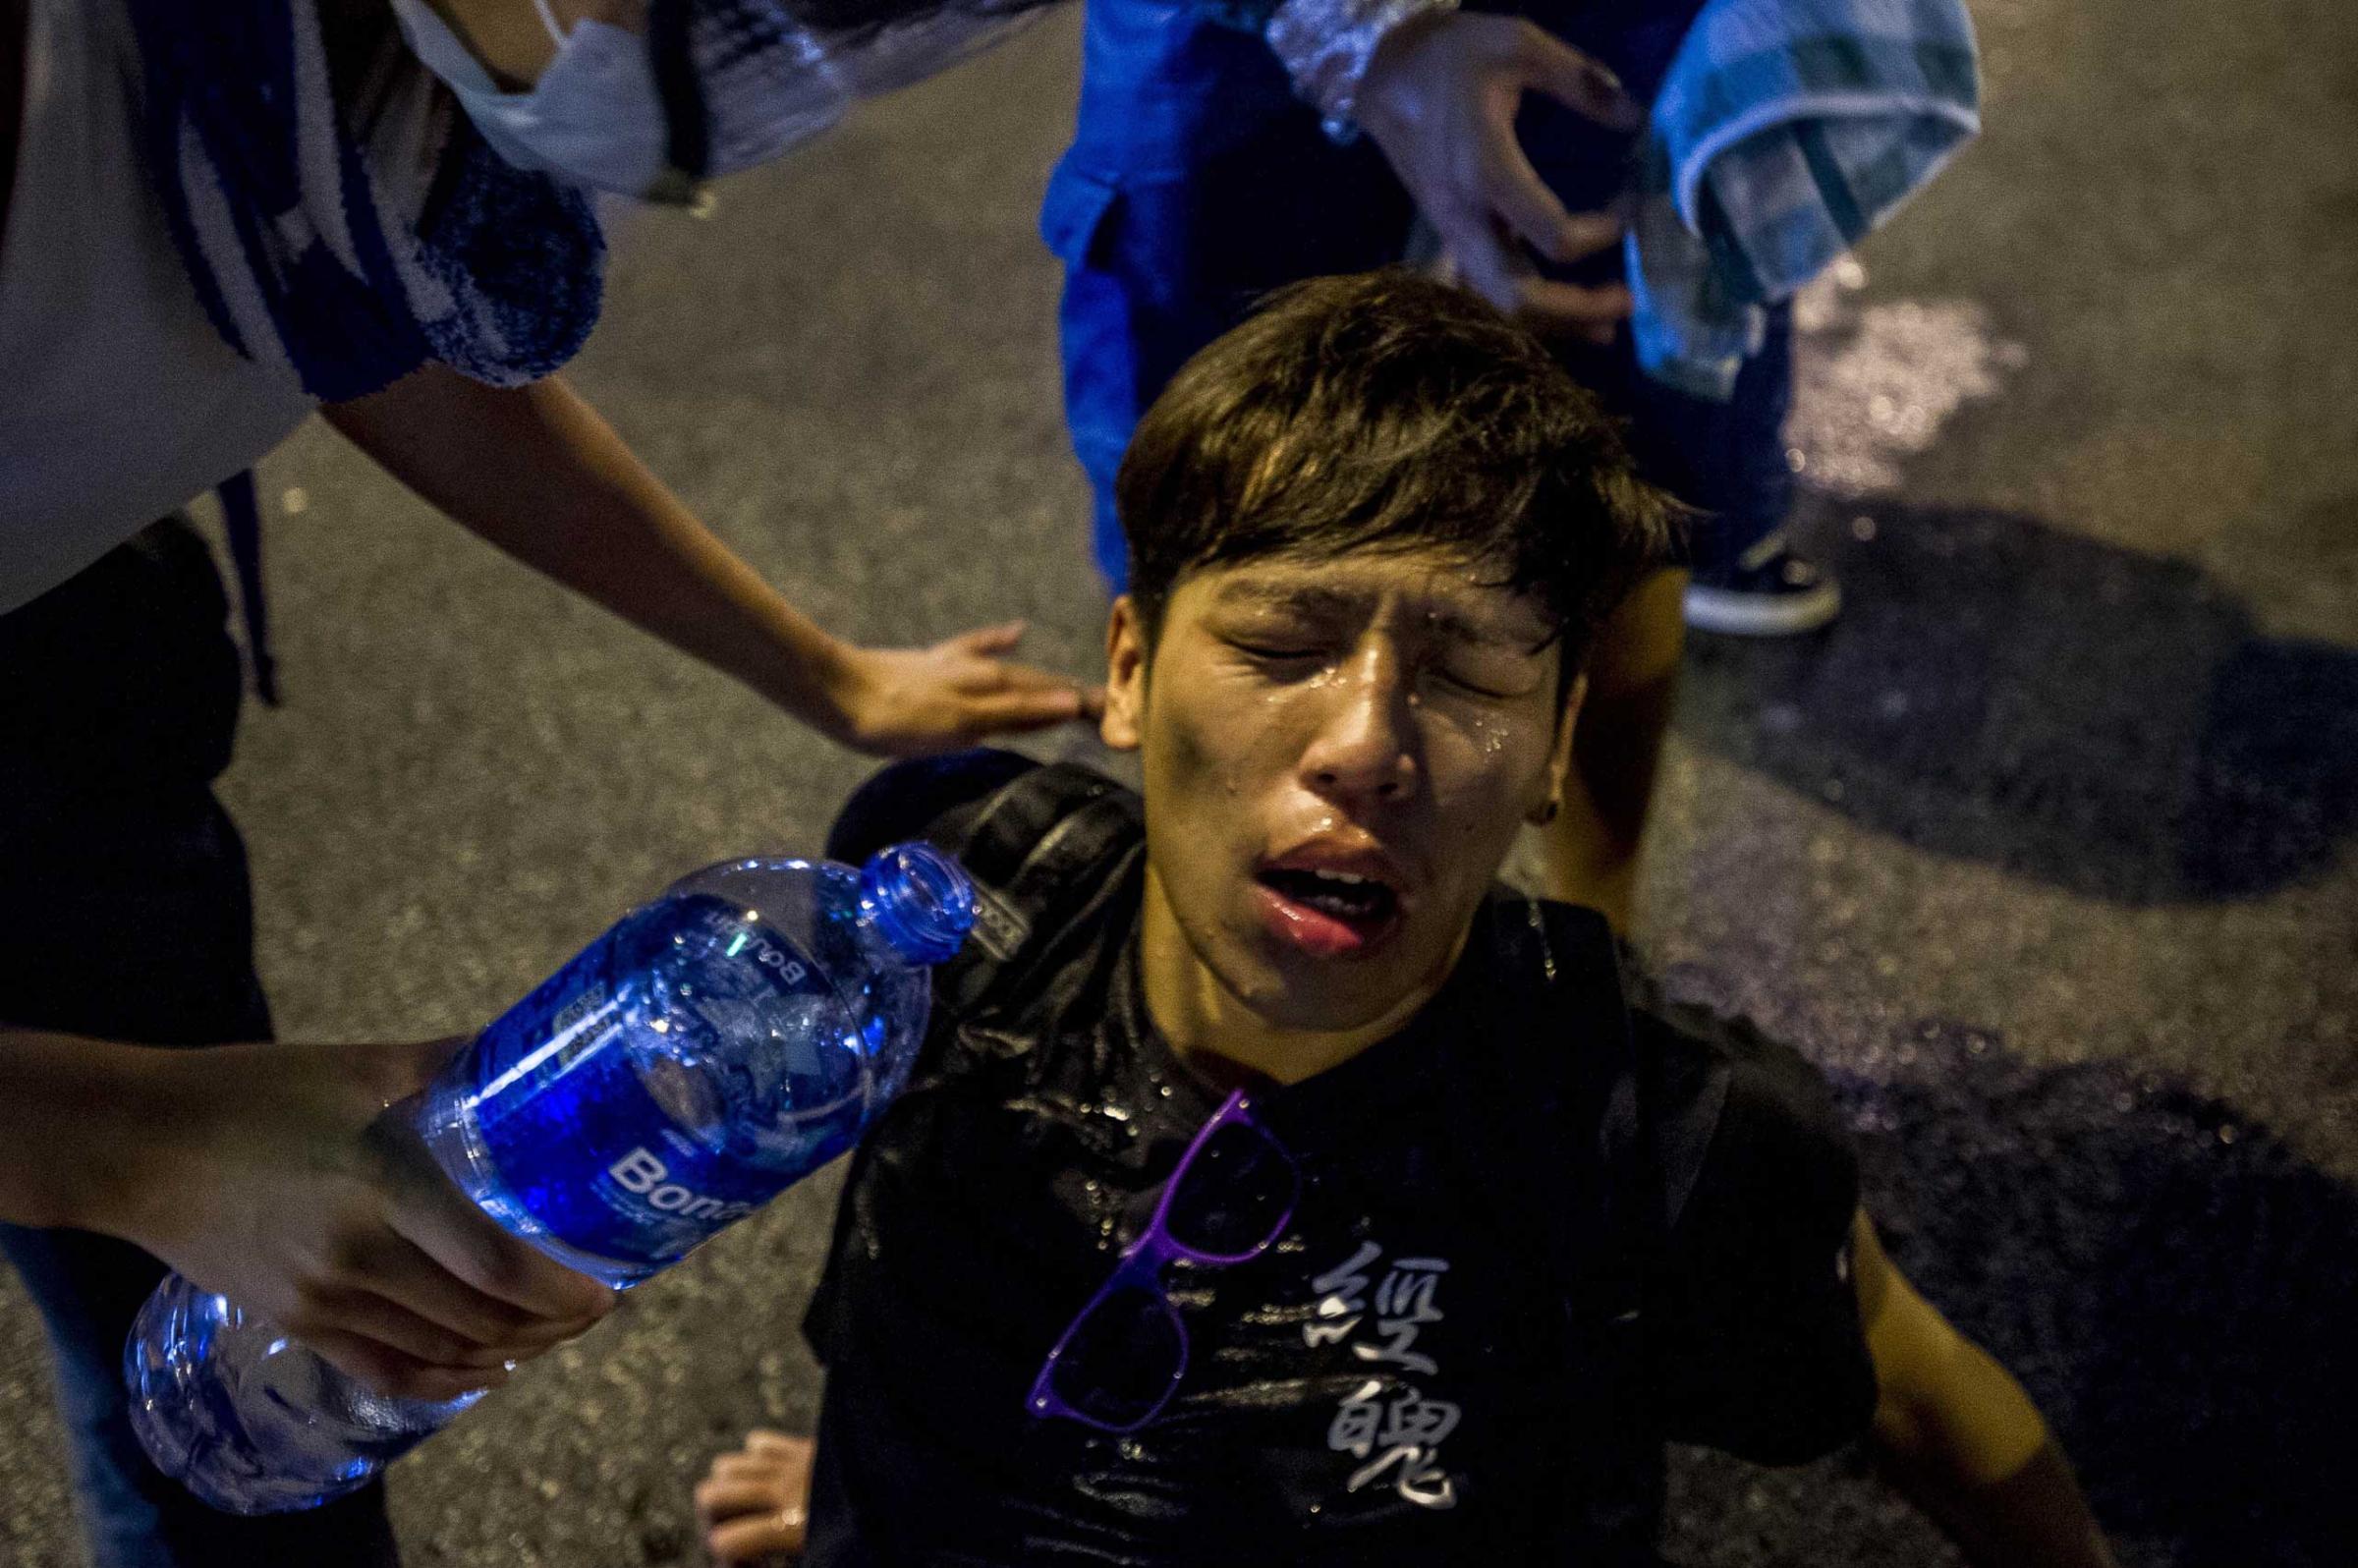 A pro-democracy demonstrator pours water over a man's face after police fired tear gas at protesters during a rally near the Hong Kong government headquarters on Sept. 28, 2014.